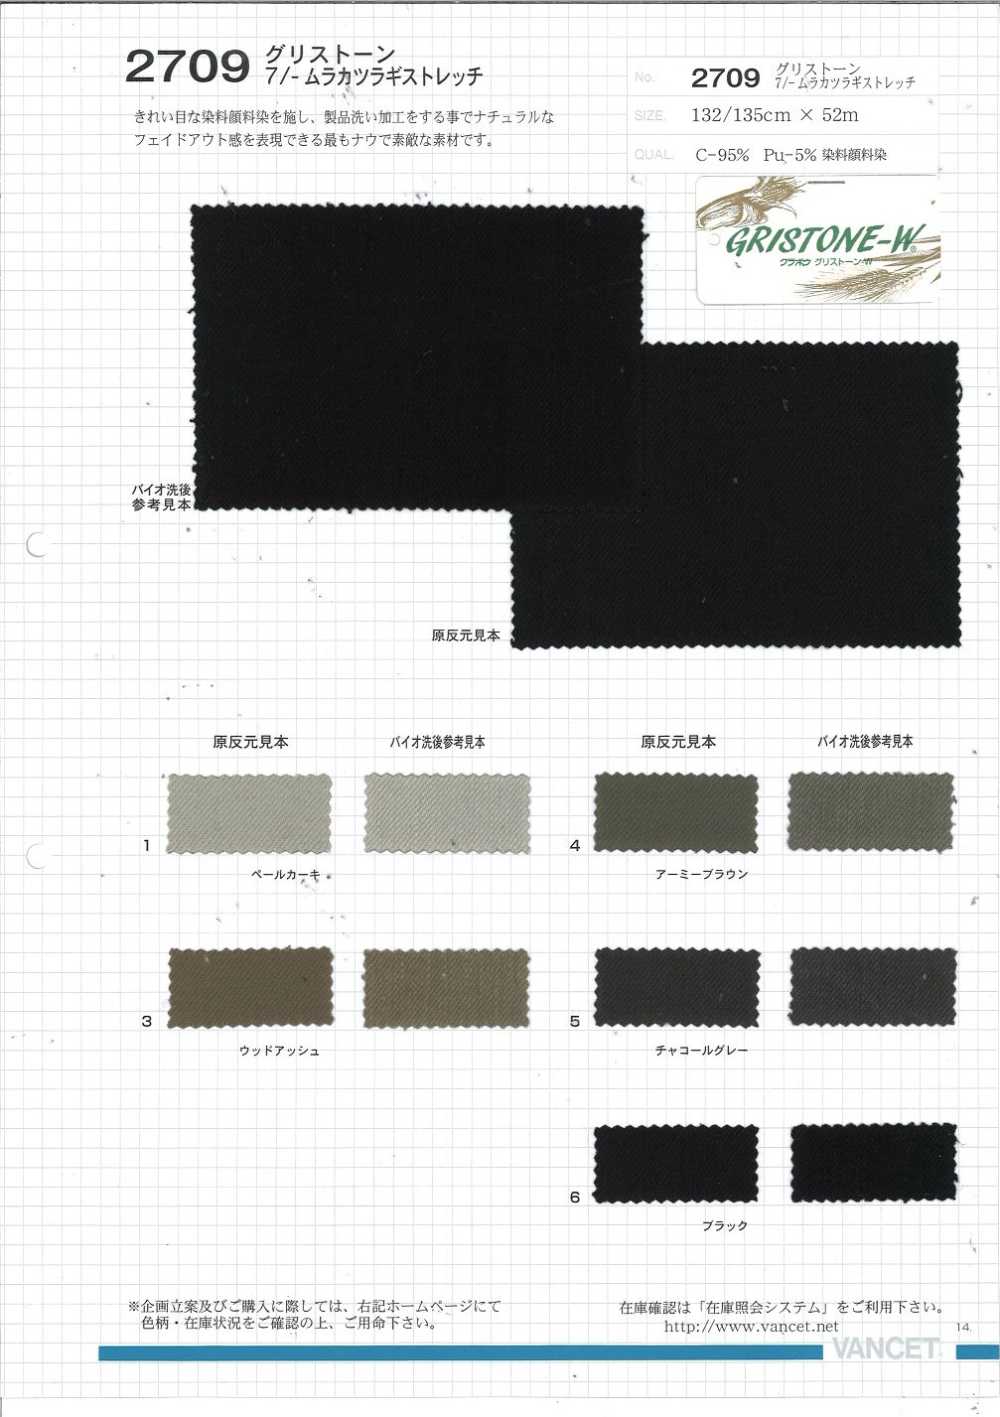 2709 Greasetone 7/ Drill Stretch Dye Pigment Dyed[Textile / Fabric] VANCET